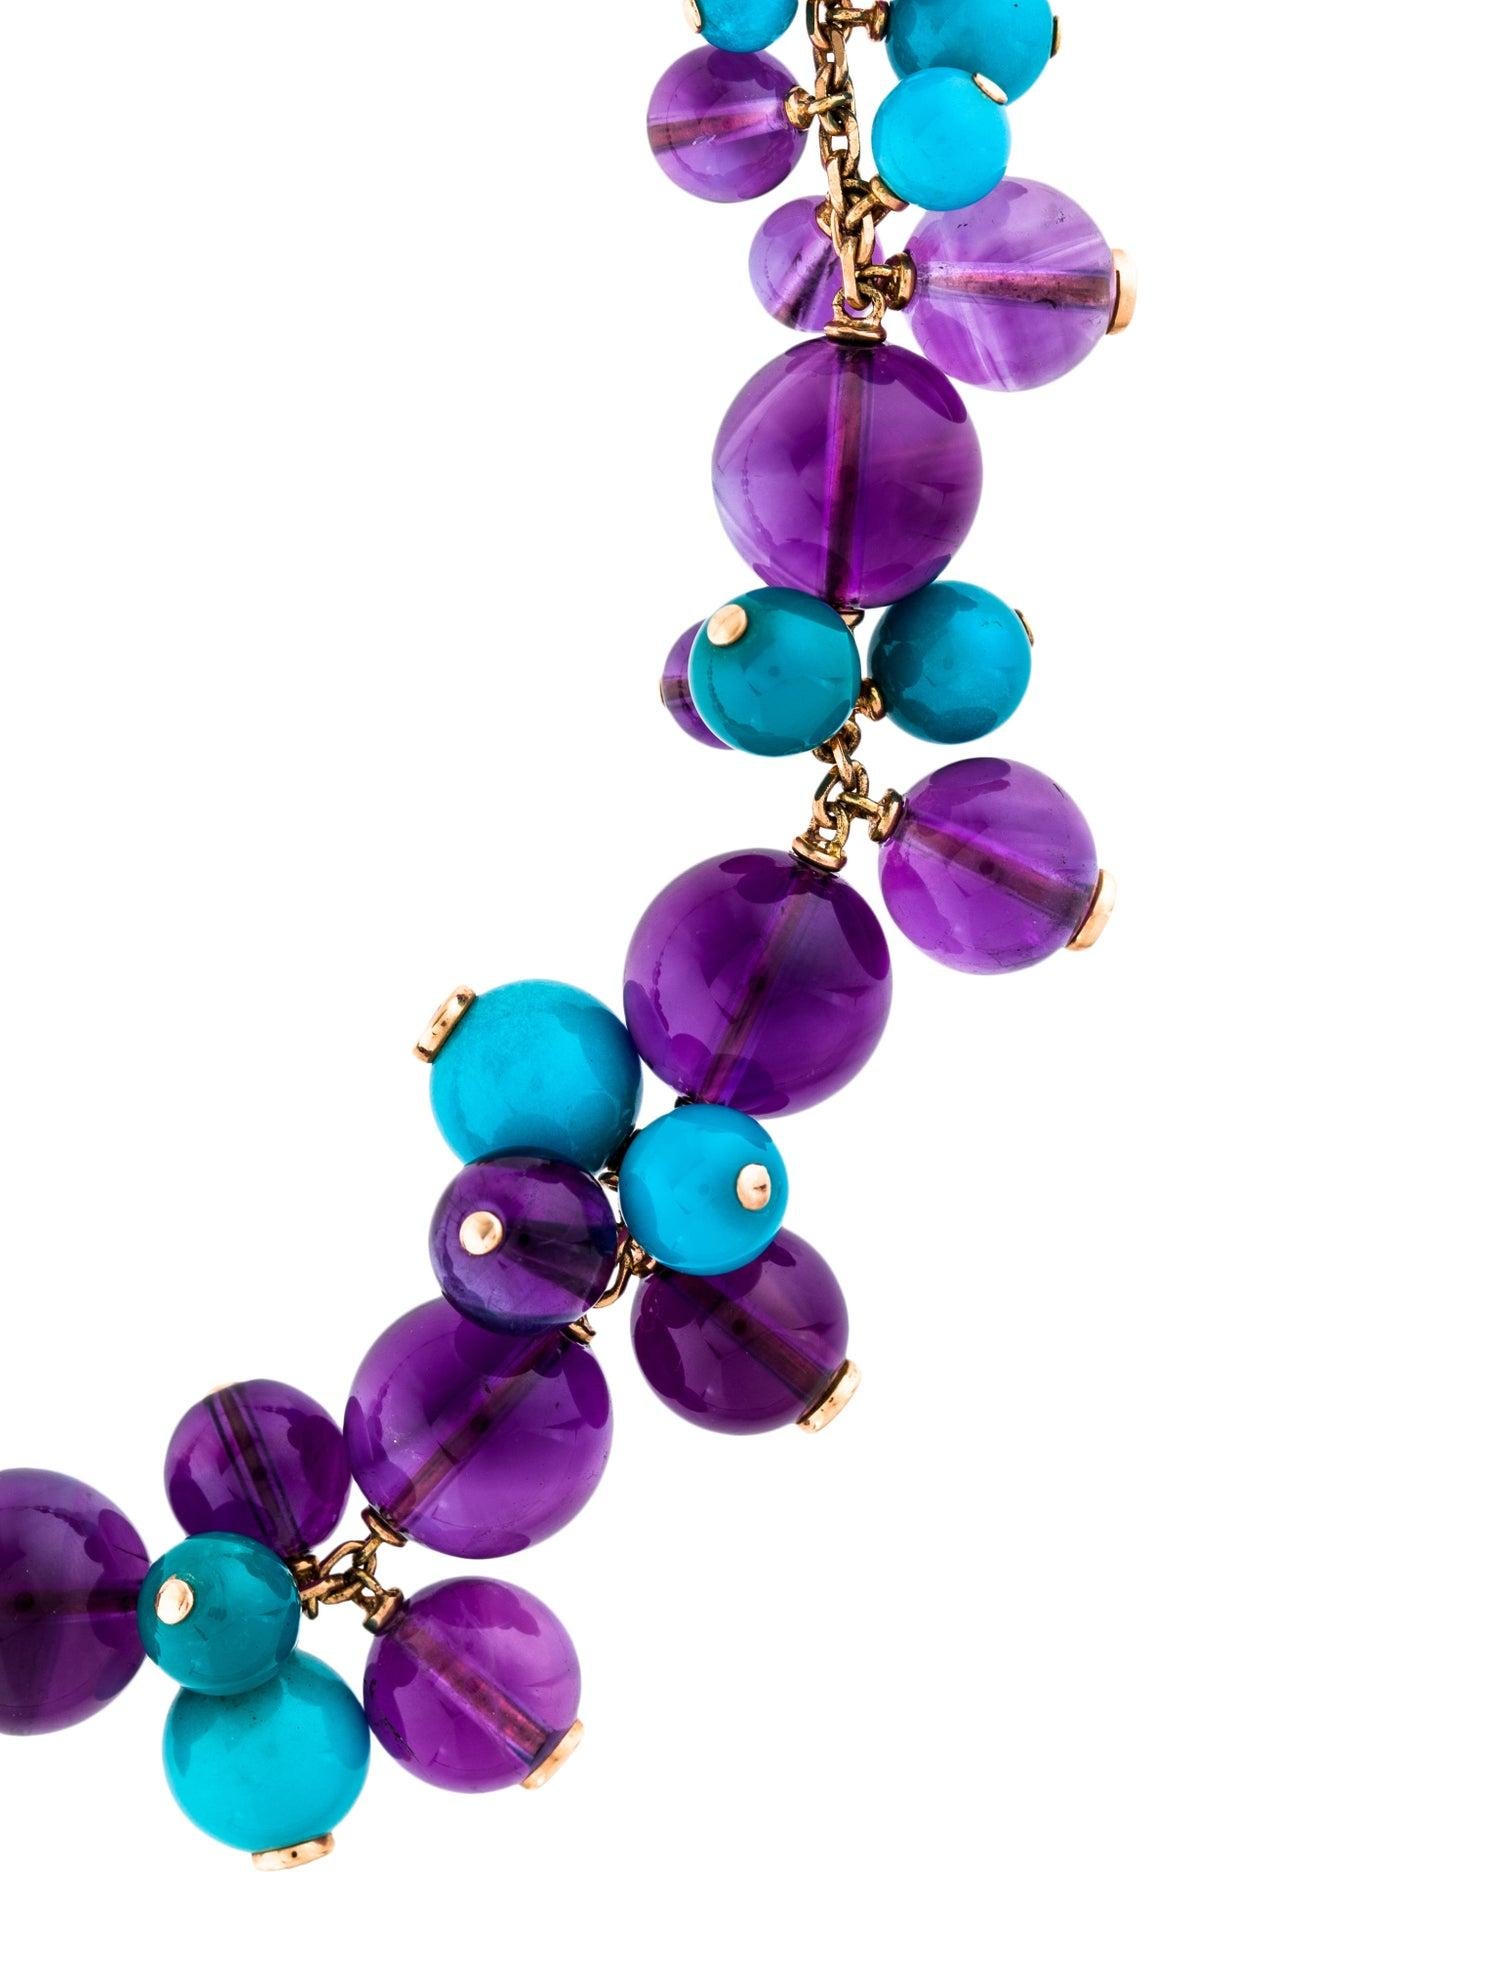 18K yellow gold Cartier Delices de Goa necklace featuring turquoise and amethyst beads throughout with 0.40 carats of round brilliant cut diamond accents and an open box closure.

Metal Type: 18K Yellow Gold
Hallmark: 750, Designer Signature, French